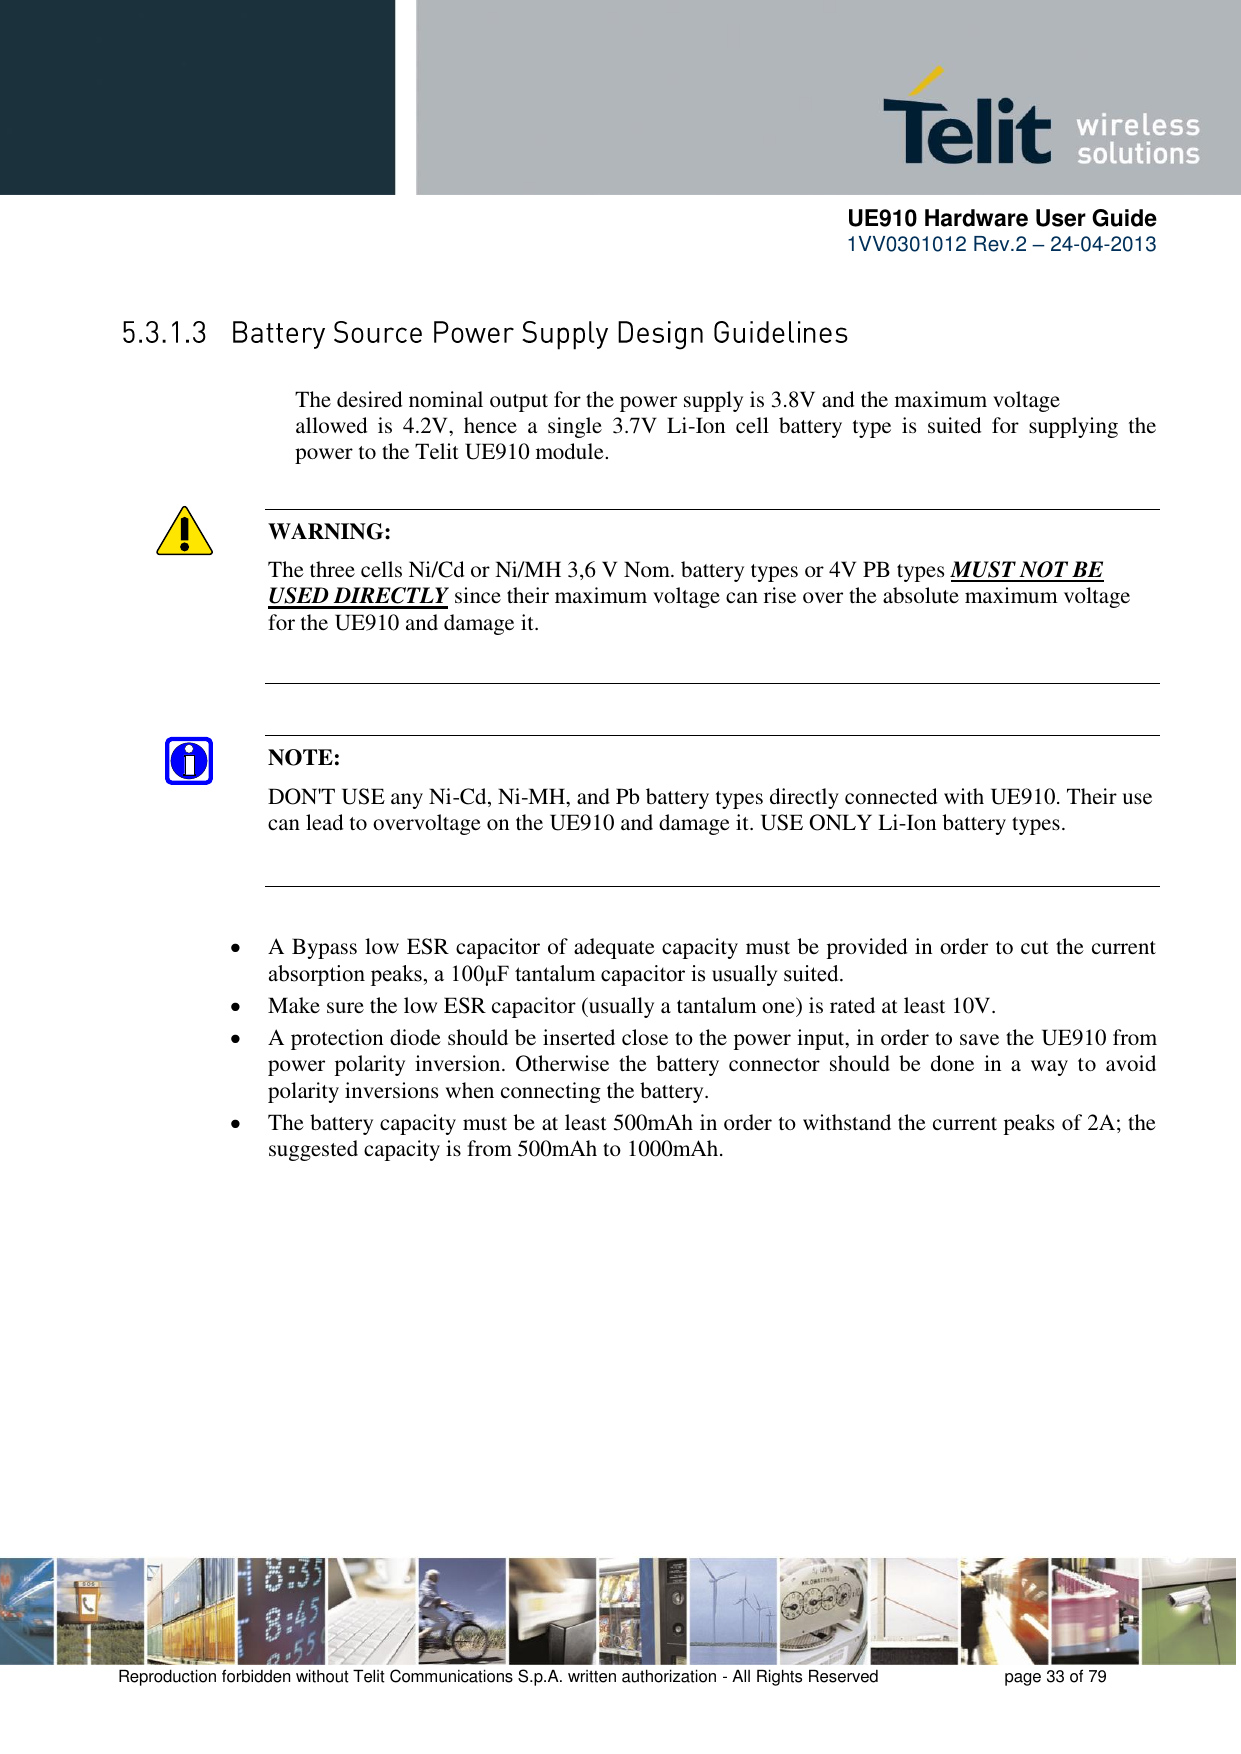      UE910 Hardware User Guide  1VV0301012 Rev.2 – 24-04-2013    Reproduction forbidden without Telit Communications S.p.A. written authorization - All Rights Reserved    page 33 of 79   The desired nominal output for the power supply is 3.8V and the maximum voltage      allowed  is  4.2V,  hence  a  single  3.7V  Li-Ion  cell  battery  type  is  suited  for  supplying  the     power to the Telit UE910 module.  WARNING: The three cells Ni/Cd or Ni/MH 3,6 V Nom. battery types or 4V PB types MUST NOT BE USED DIRECTLY since their maximum voltage can rise over the absolute maximum voltage for the UE910 and damage it.   NOTE: DON&apos;T USE any Ni-Cd, Ni-MH, and Pb battery types directly connected with UE910. Their use can lead to overvoltage on the UE910 and damage it. USE ONLY Li-Ion battery types.  A Bypass low ESR capacitor of adequate capacity must be provided in order to cut the current absorption peaks, a 100μF tantalum capacitor is usually suited.  Make sure the low ESR capacitor (usually a tantalum one) is rated at least 10V.  A protection diode should be inserted close to the power input, in order to save the UE910 from power  polarity inversion. Otherwise  the battery  connector should  be done  in a  way to avoid polarity inversions when connecting the battery.  The battery capacity must be at least 500mAh in order to withstand the current peaks of 2A; the suggested capacity is from 500mAh to 1000mAh. 